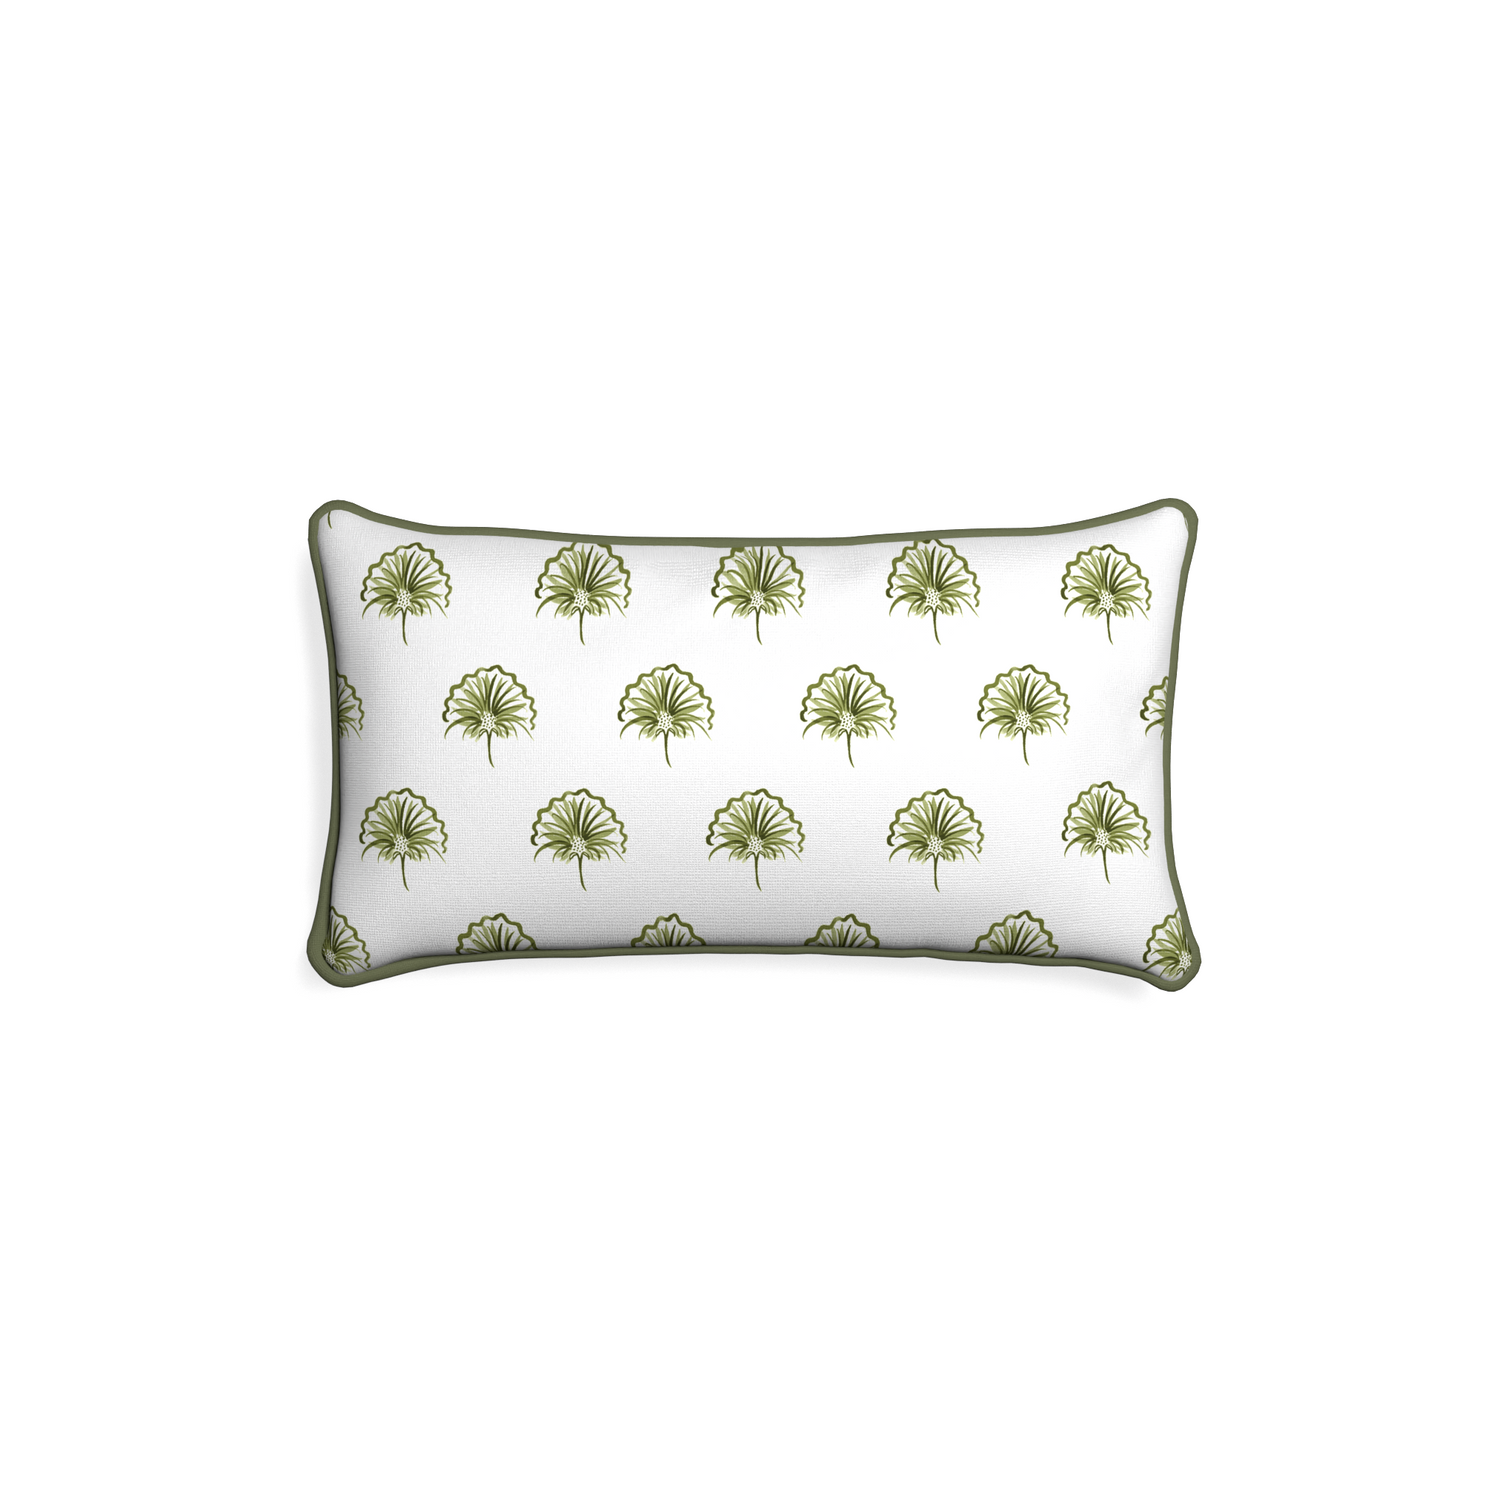 Petite-lumbar penelope moss custom green floralpillow with f piping on white background